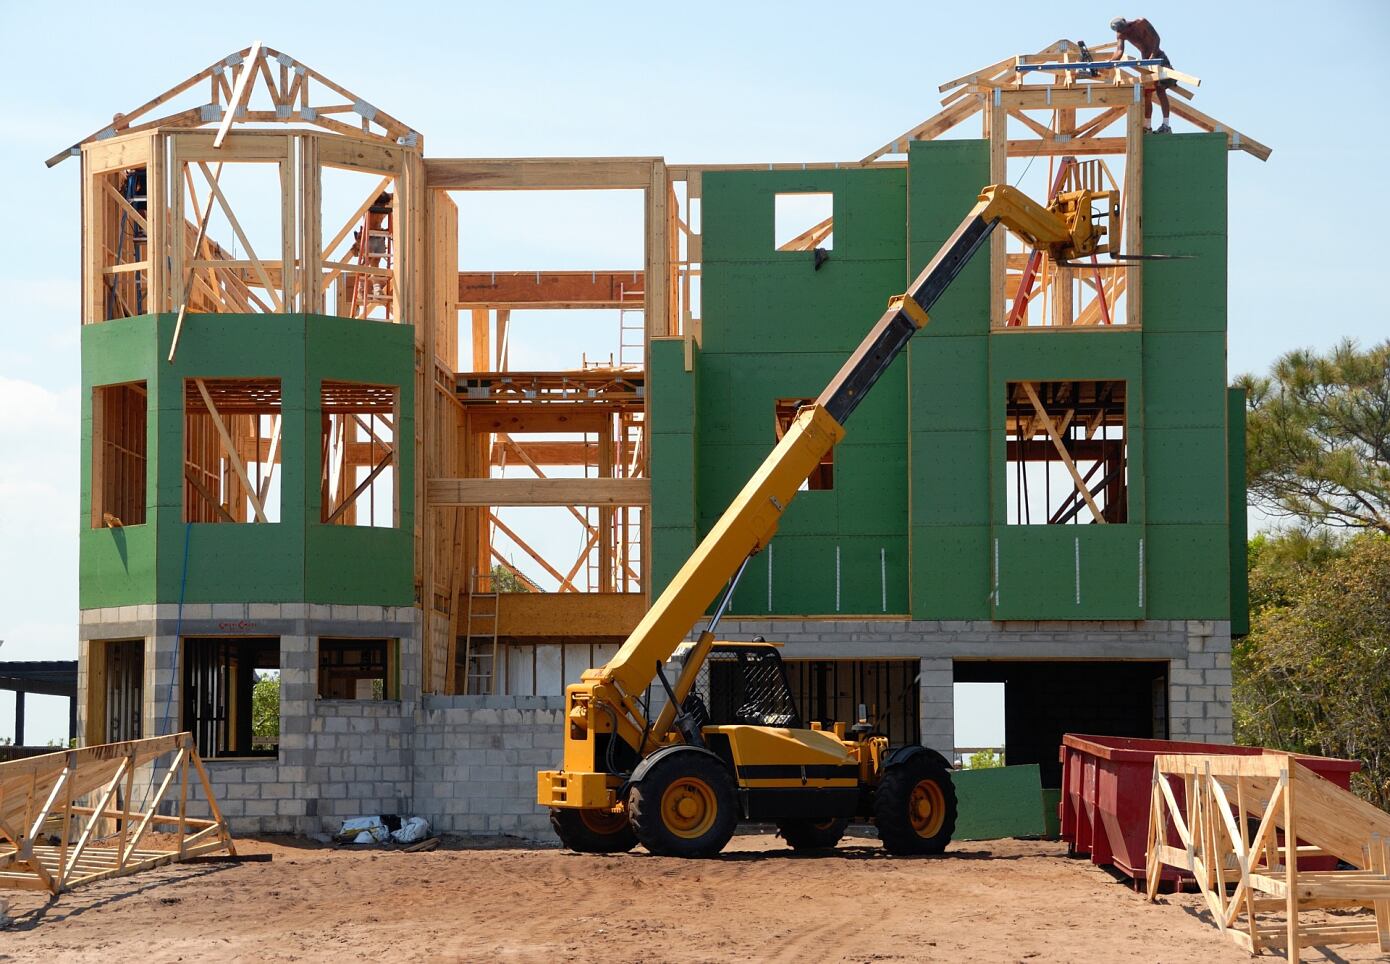 5 Things You Should Know Before Taking Out a Construction Loan